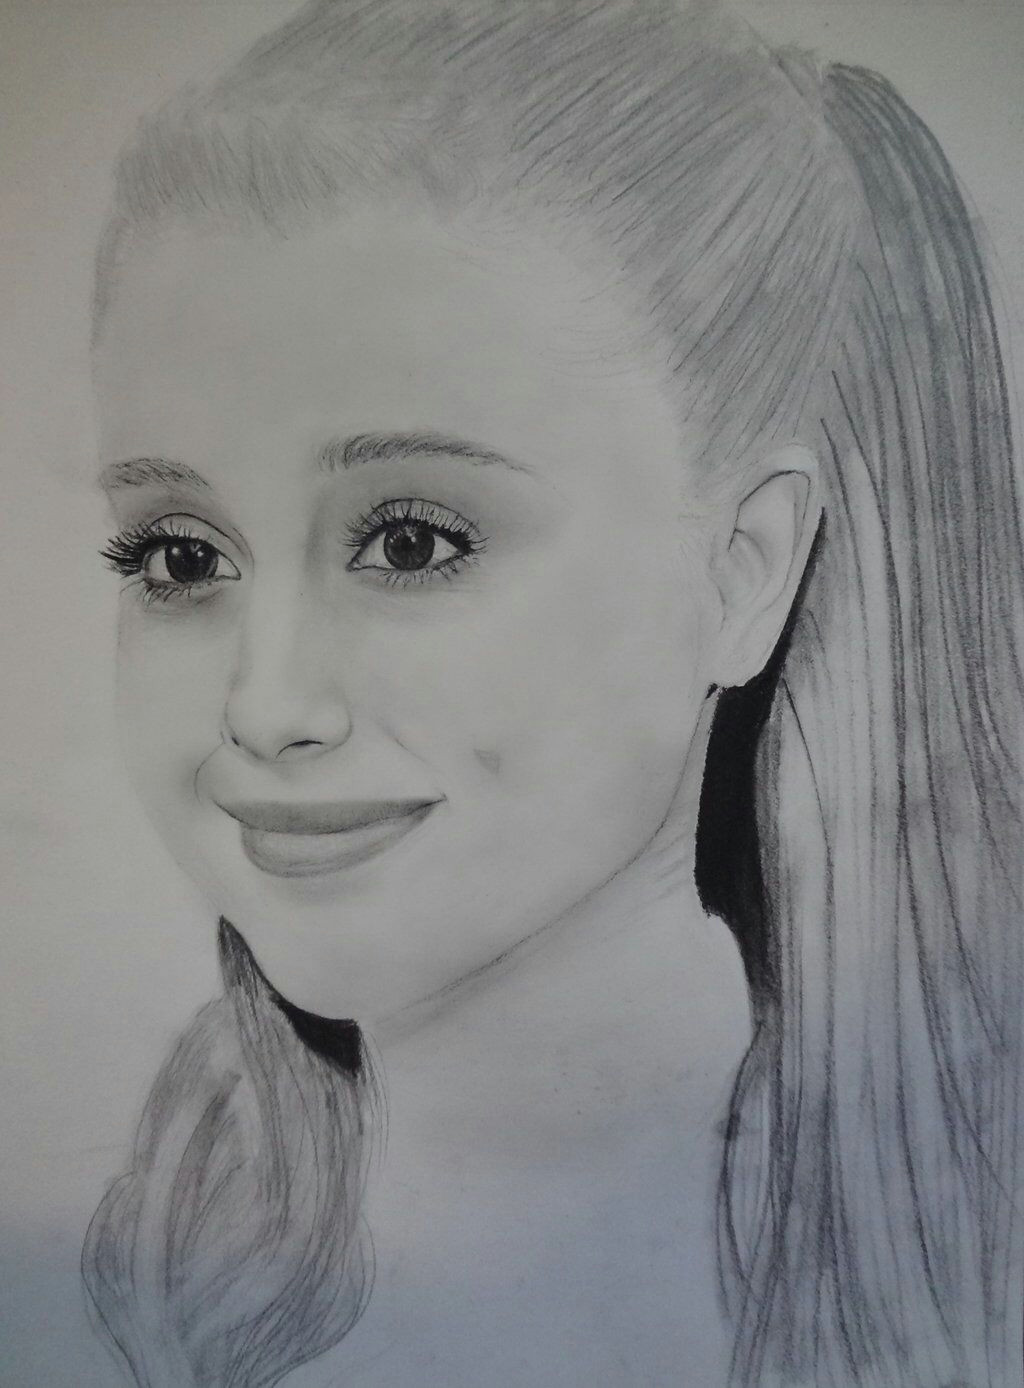 How to Draw Ariana Grande Realistic Easy Ariana Grande Celebrity Drawings Ariana Grande Art Drawings